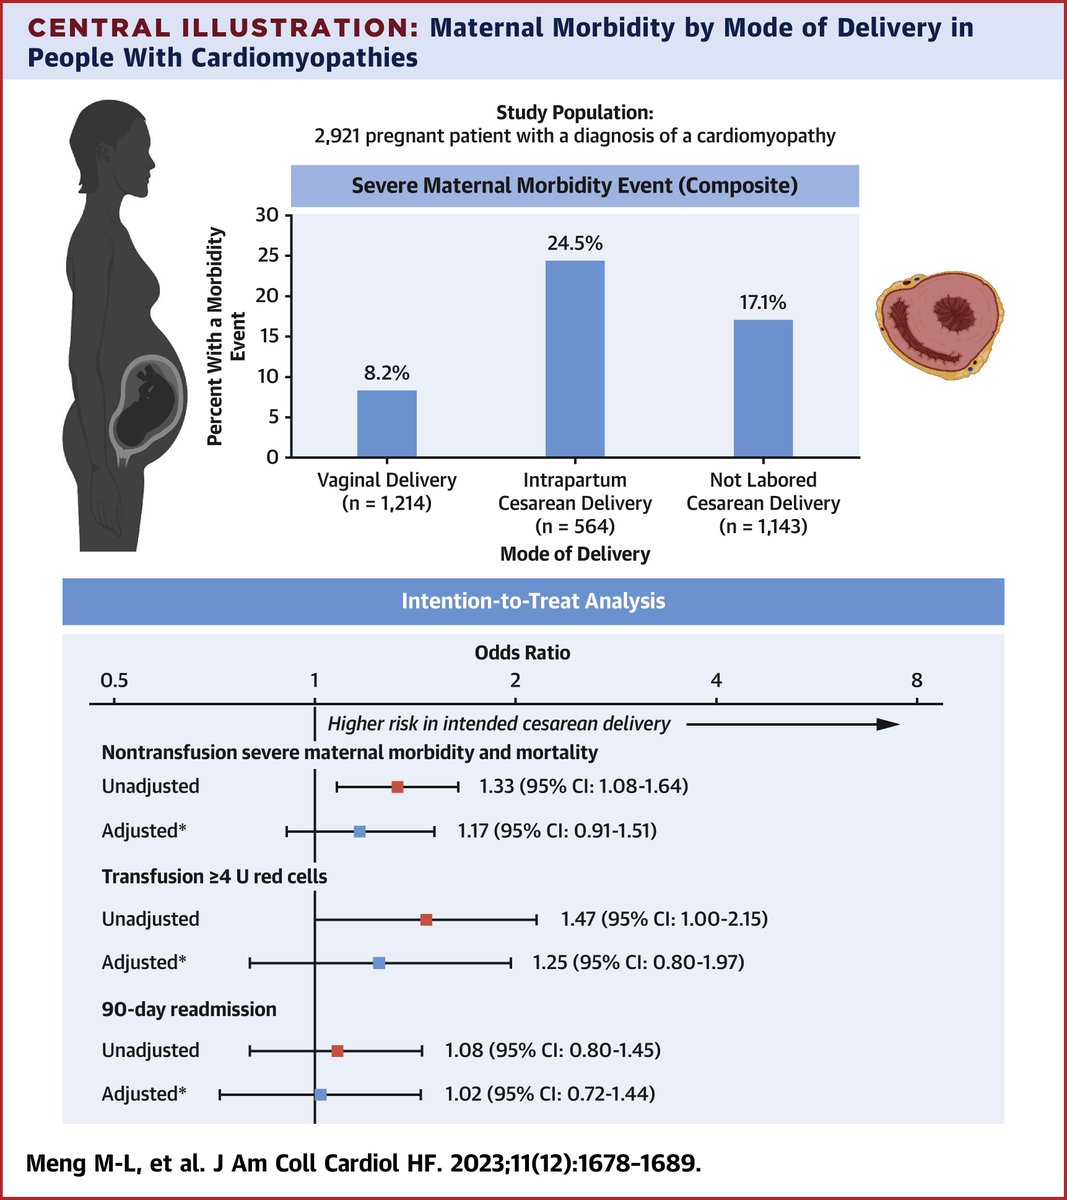 In patients with cardiomyopathies, a trial of labor does not confer a higher risk of maternal morbidity, blood transfusion, or readmission compared with planned cesarean delivery. bit.ly/3uQIjLz #JACCHF #CardioObstetrics